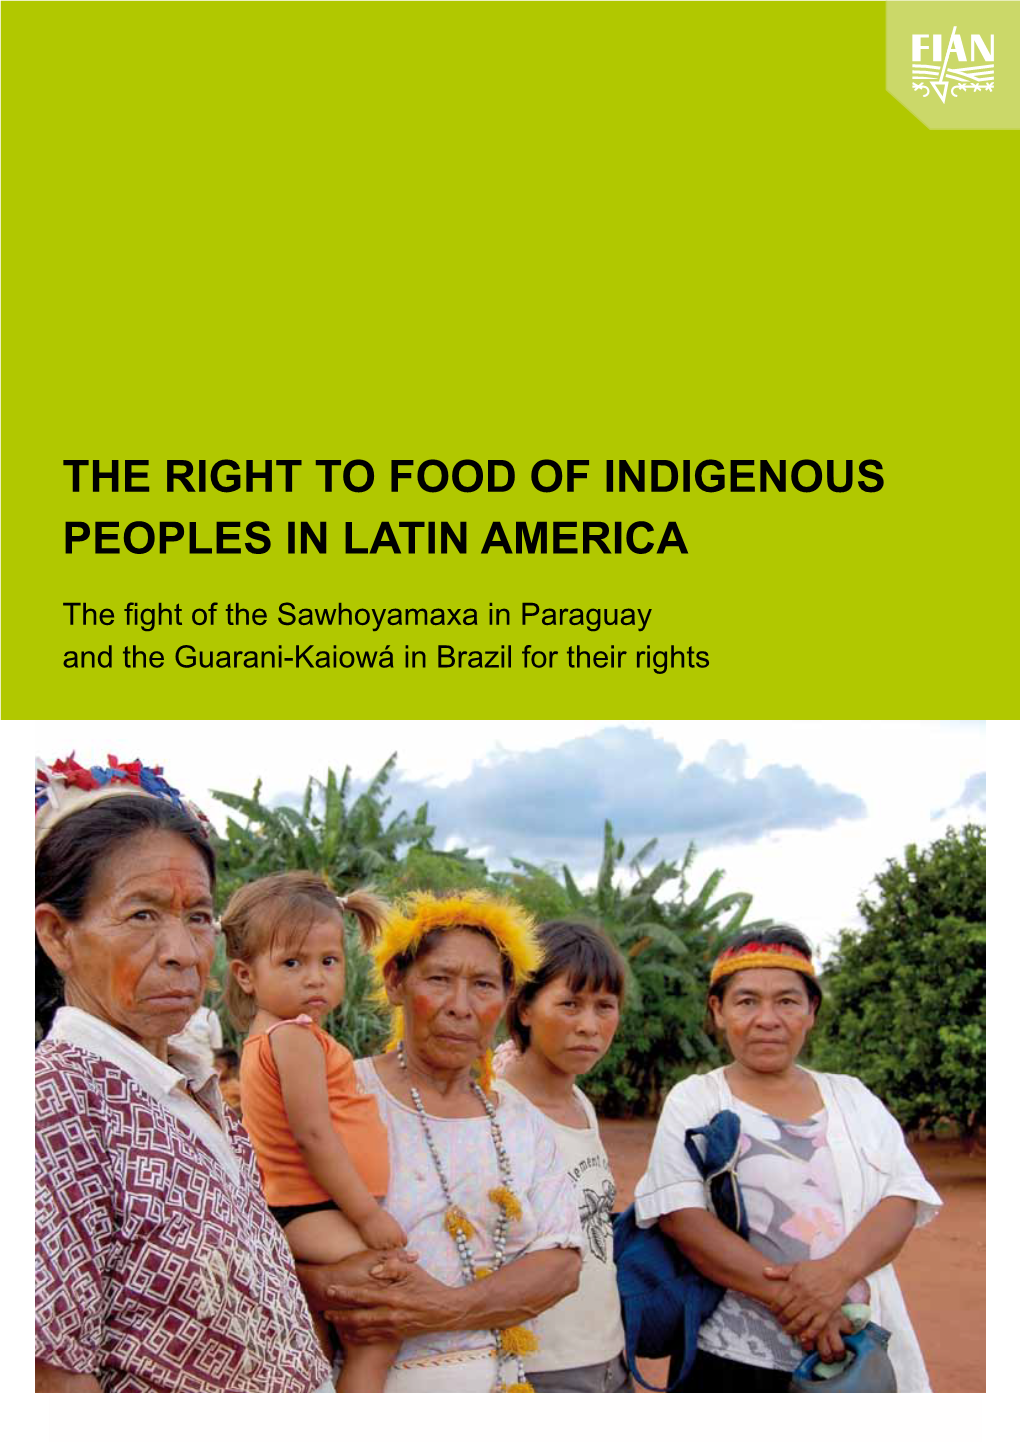 The Right to Food of Indigenous Peoples in Latin America